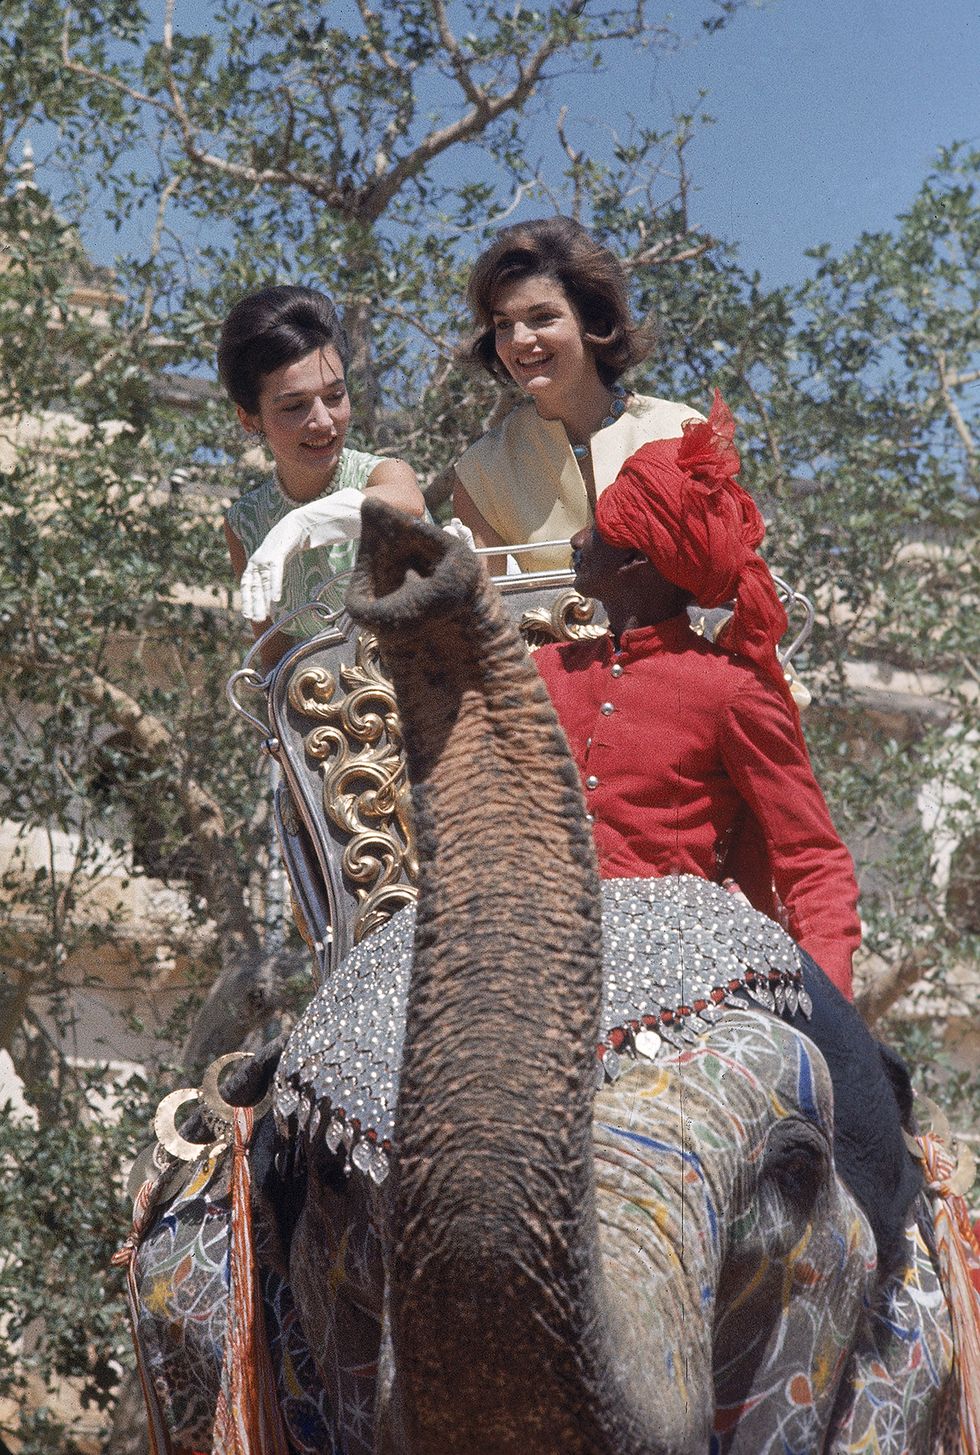 american first lady jacqueline kennedy 1929   1994 right and her younger sister lee radziwill smile as they ride an elephant while on a trip in india, 1962 photo by art rickerbythe life picture collection via getty images